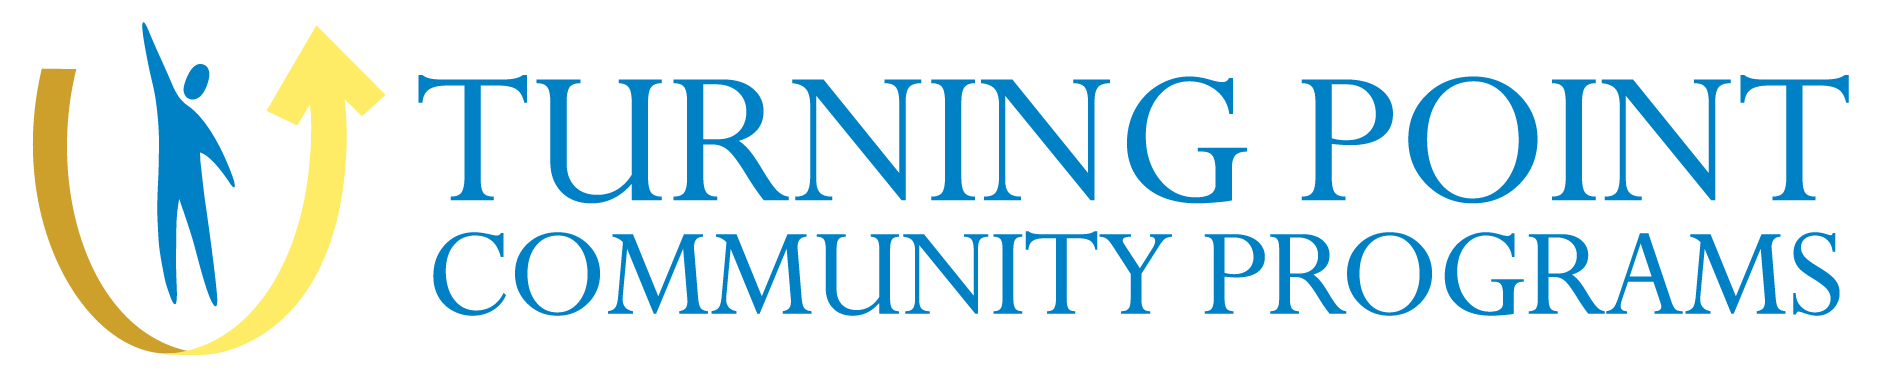 Logo: Illustration of a person with right arm up standing above U shaped arrow, next to the words Turning Point Community Programs